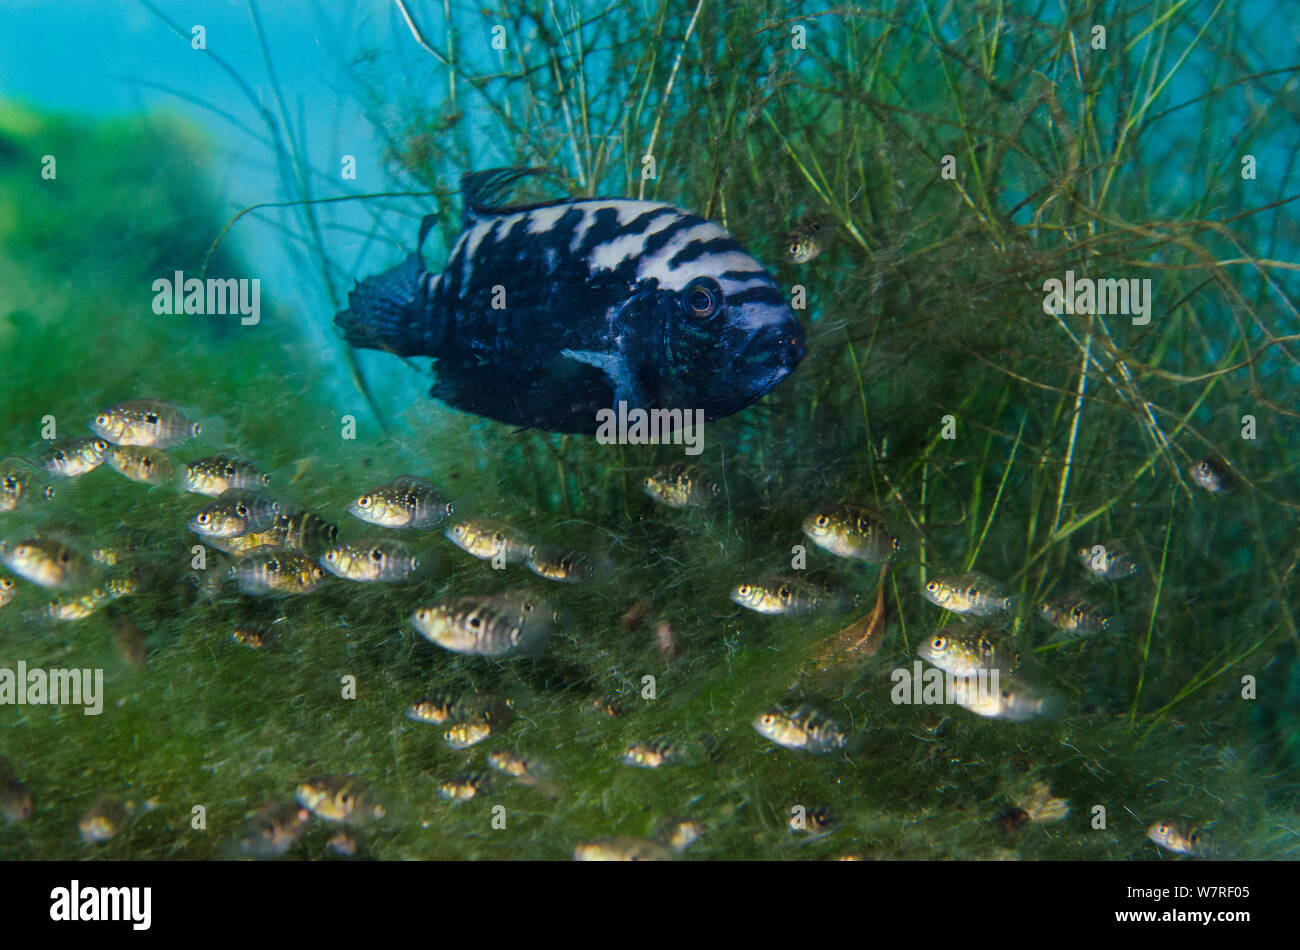 Jack Dempsey cichlid (Rocio octofasciata) guarding its young, while they shelter in aquatic vegetation in Cenote pool. Cichlids are notable amongst fish for their high level of parental care. Puerto Aventuras, Quintana Roo, Mexico. Stock Photo